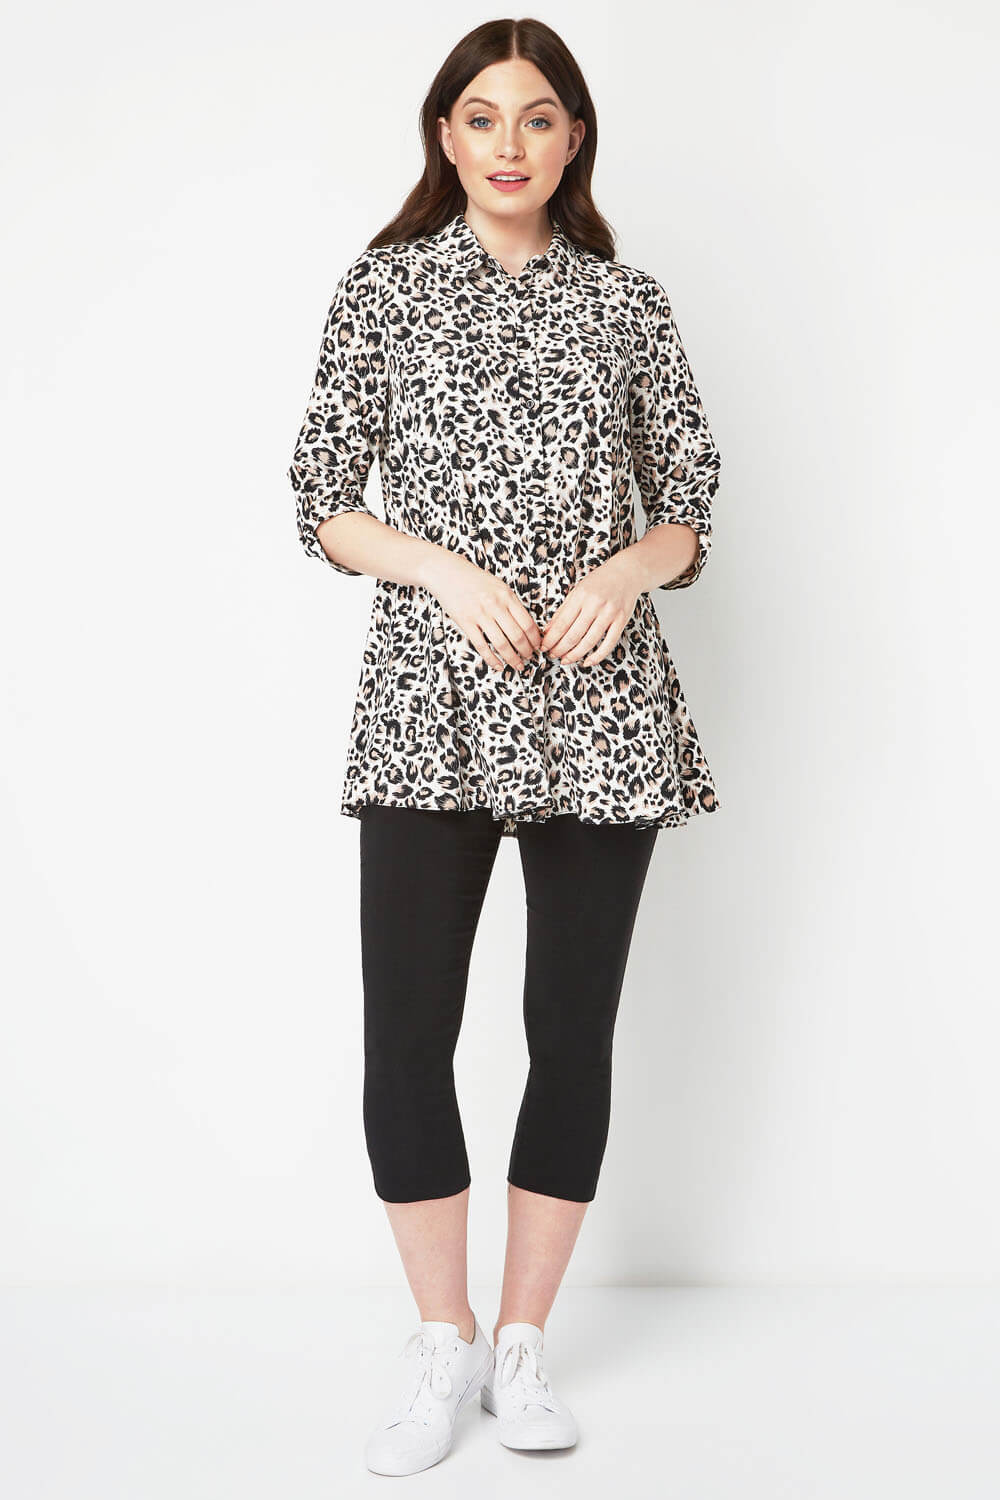 Brown Leopard Print Tunic Blouse, Image 2 of 8